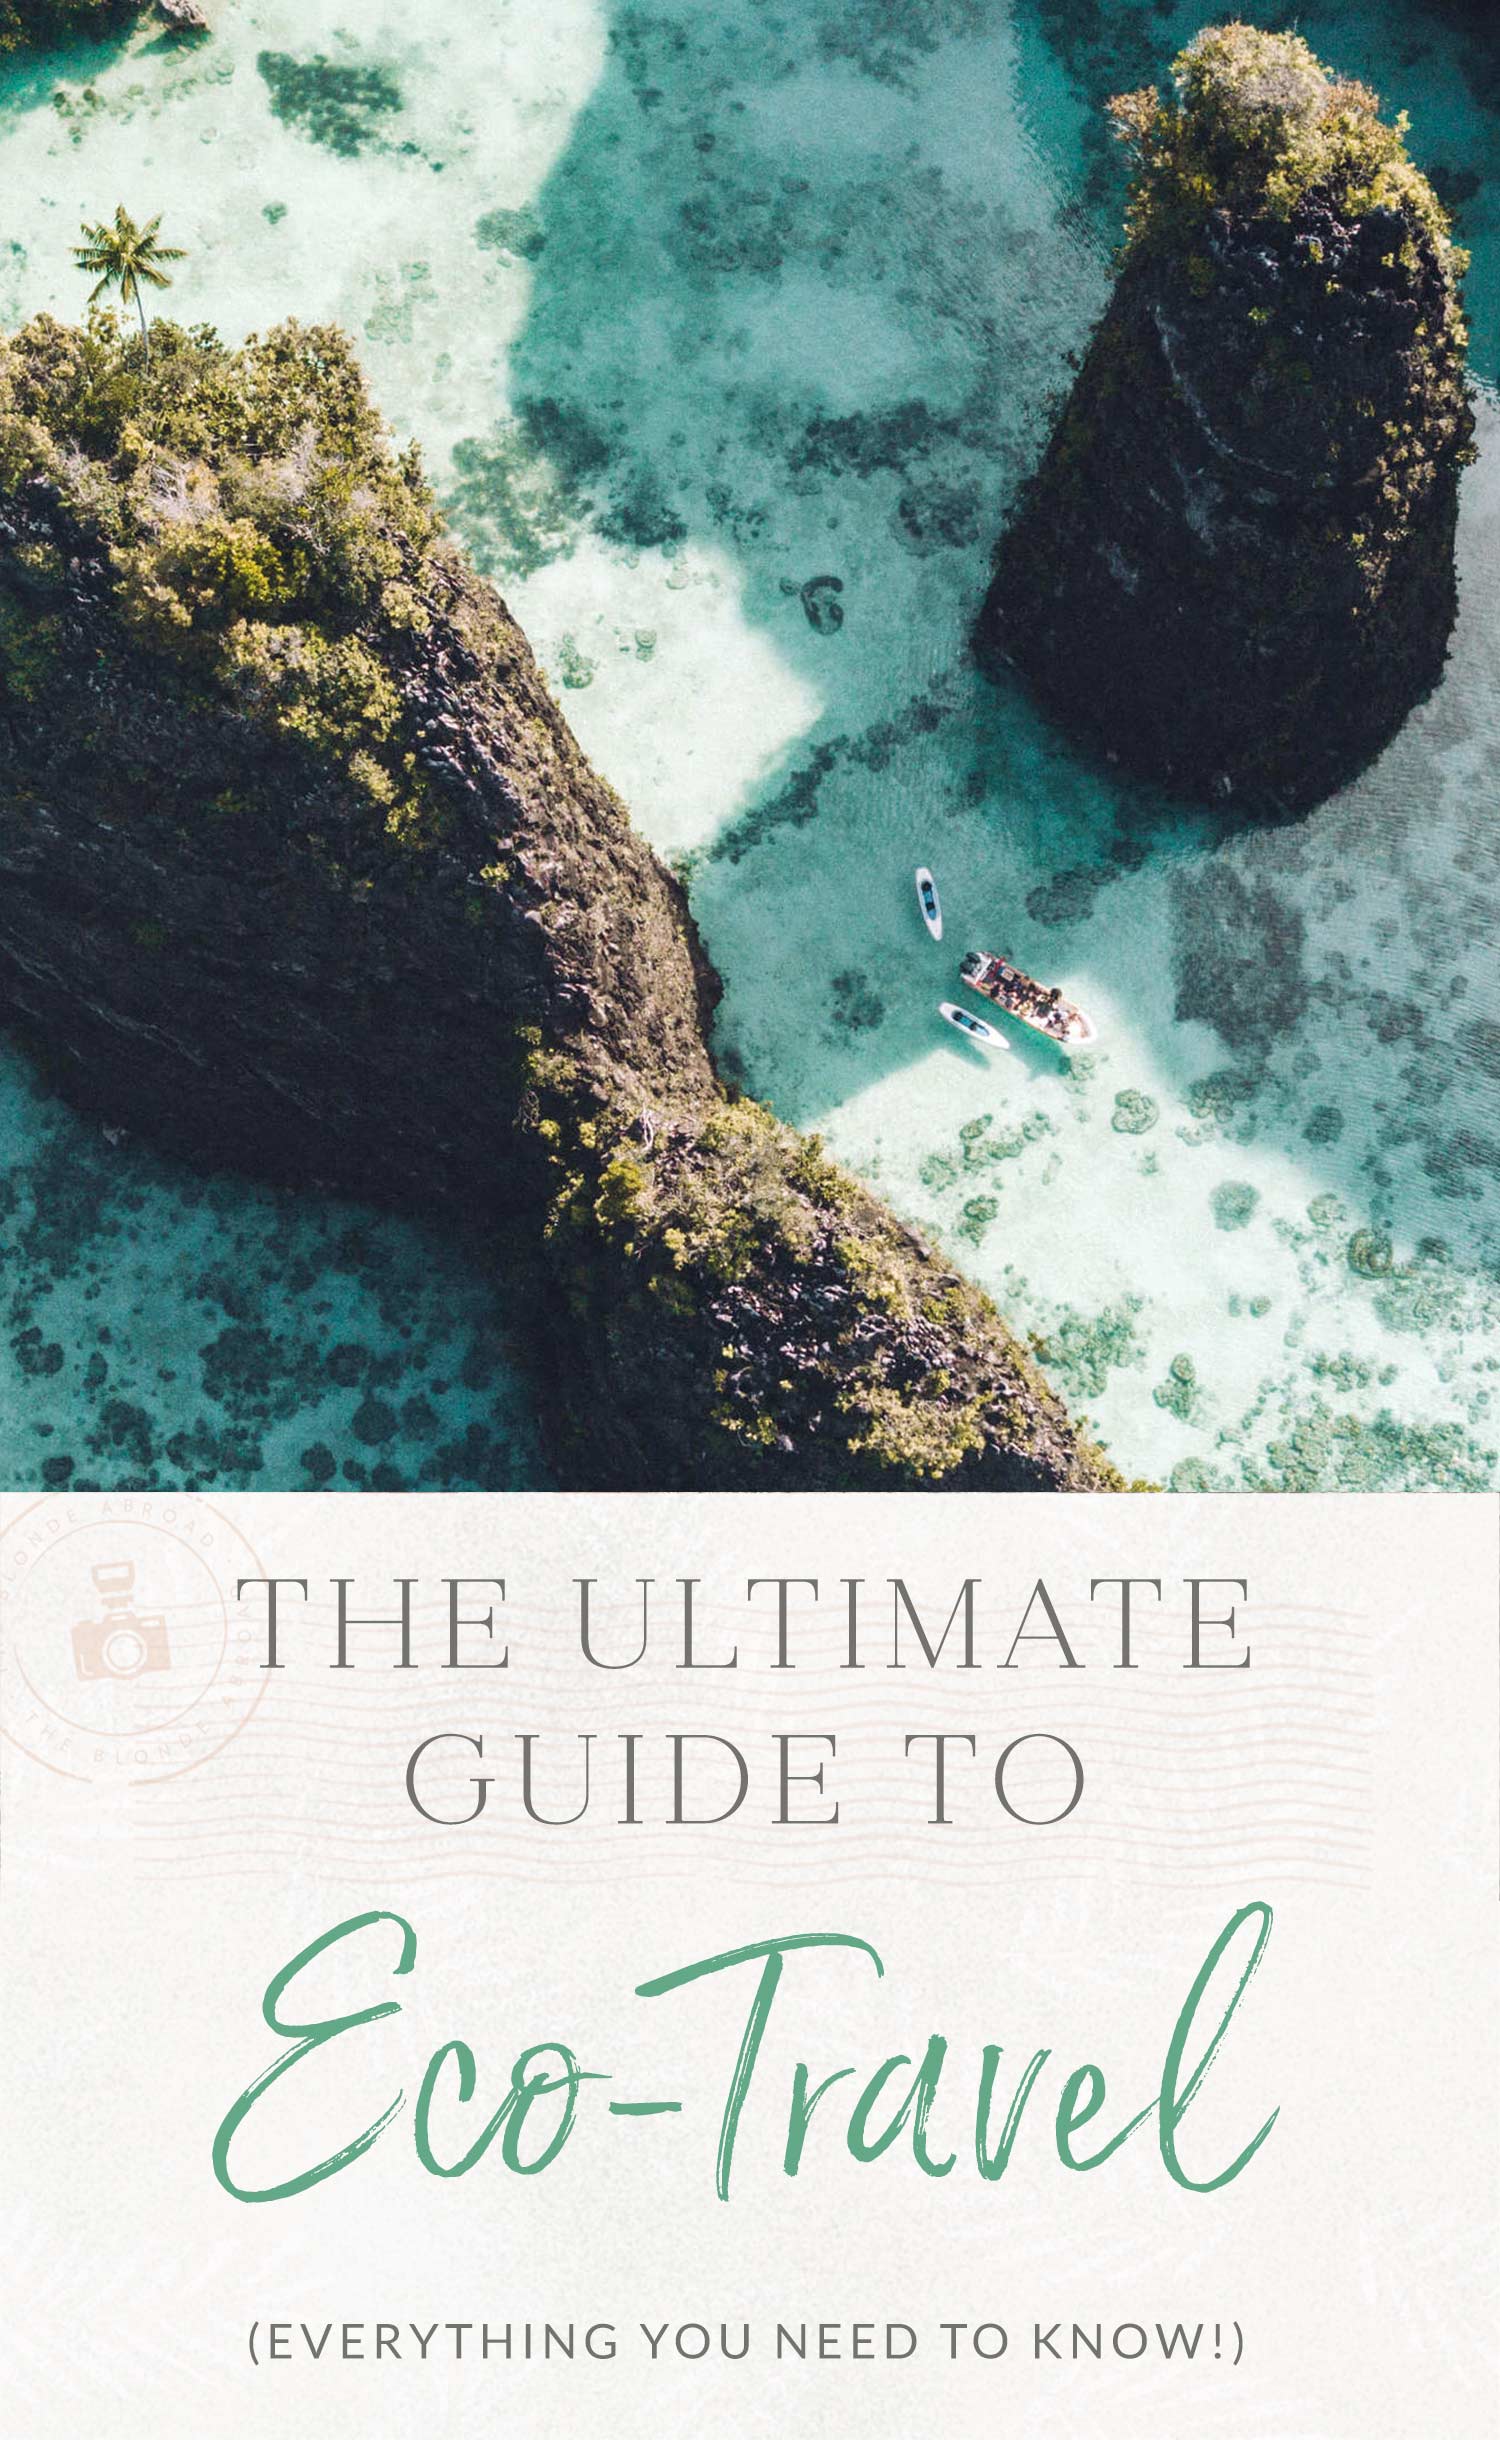 The Ultimate Eco-Travel Guide